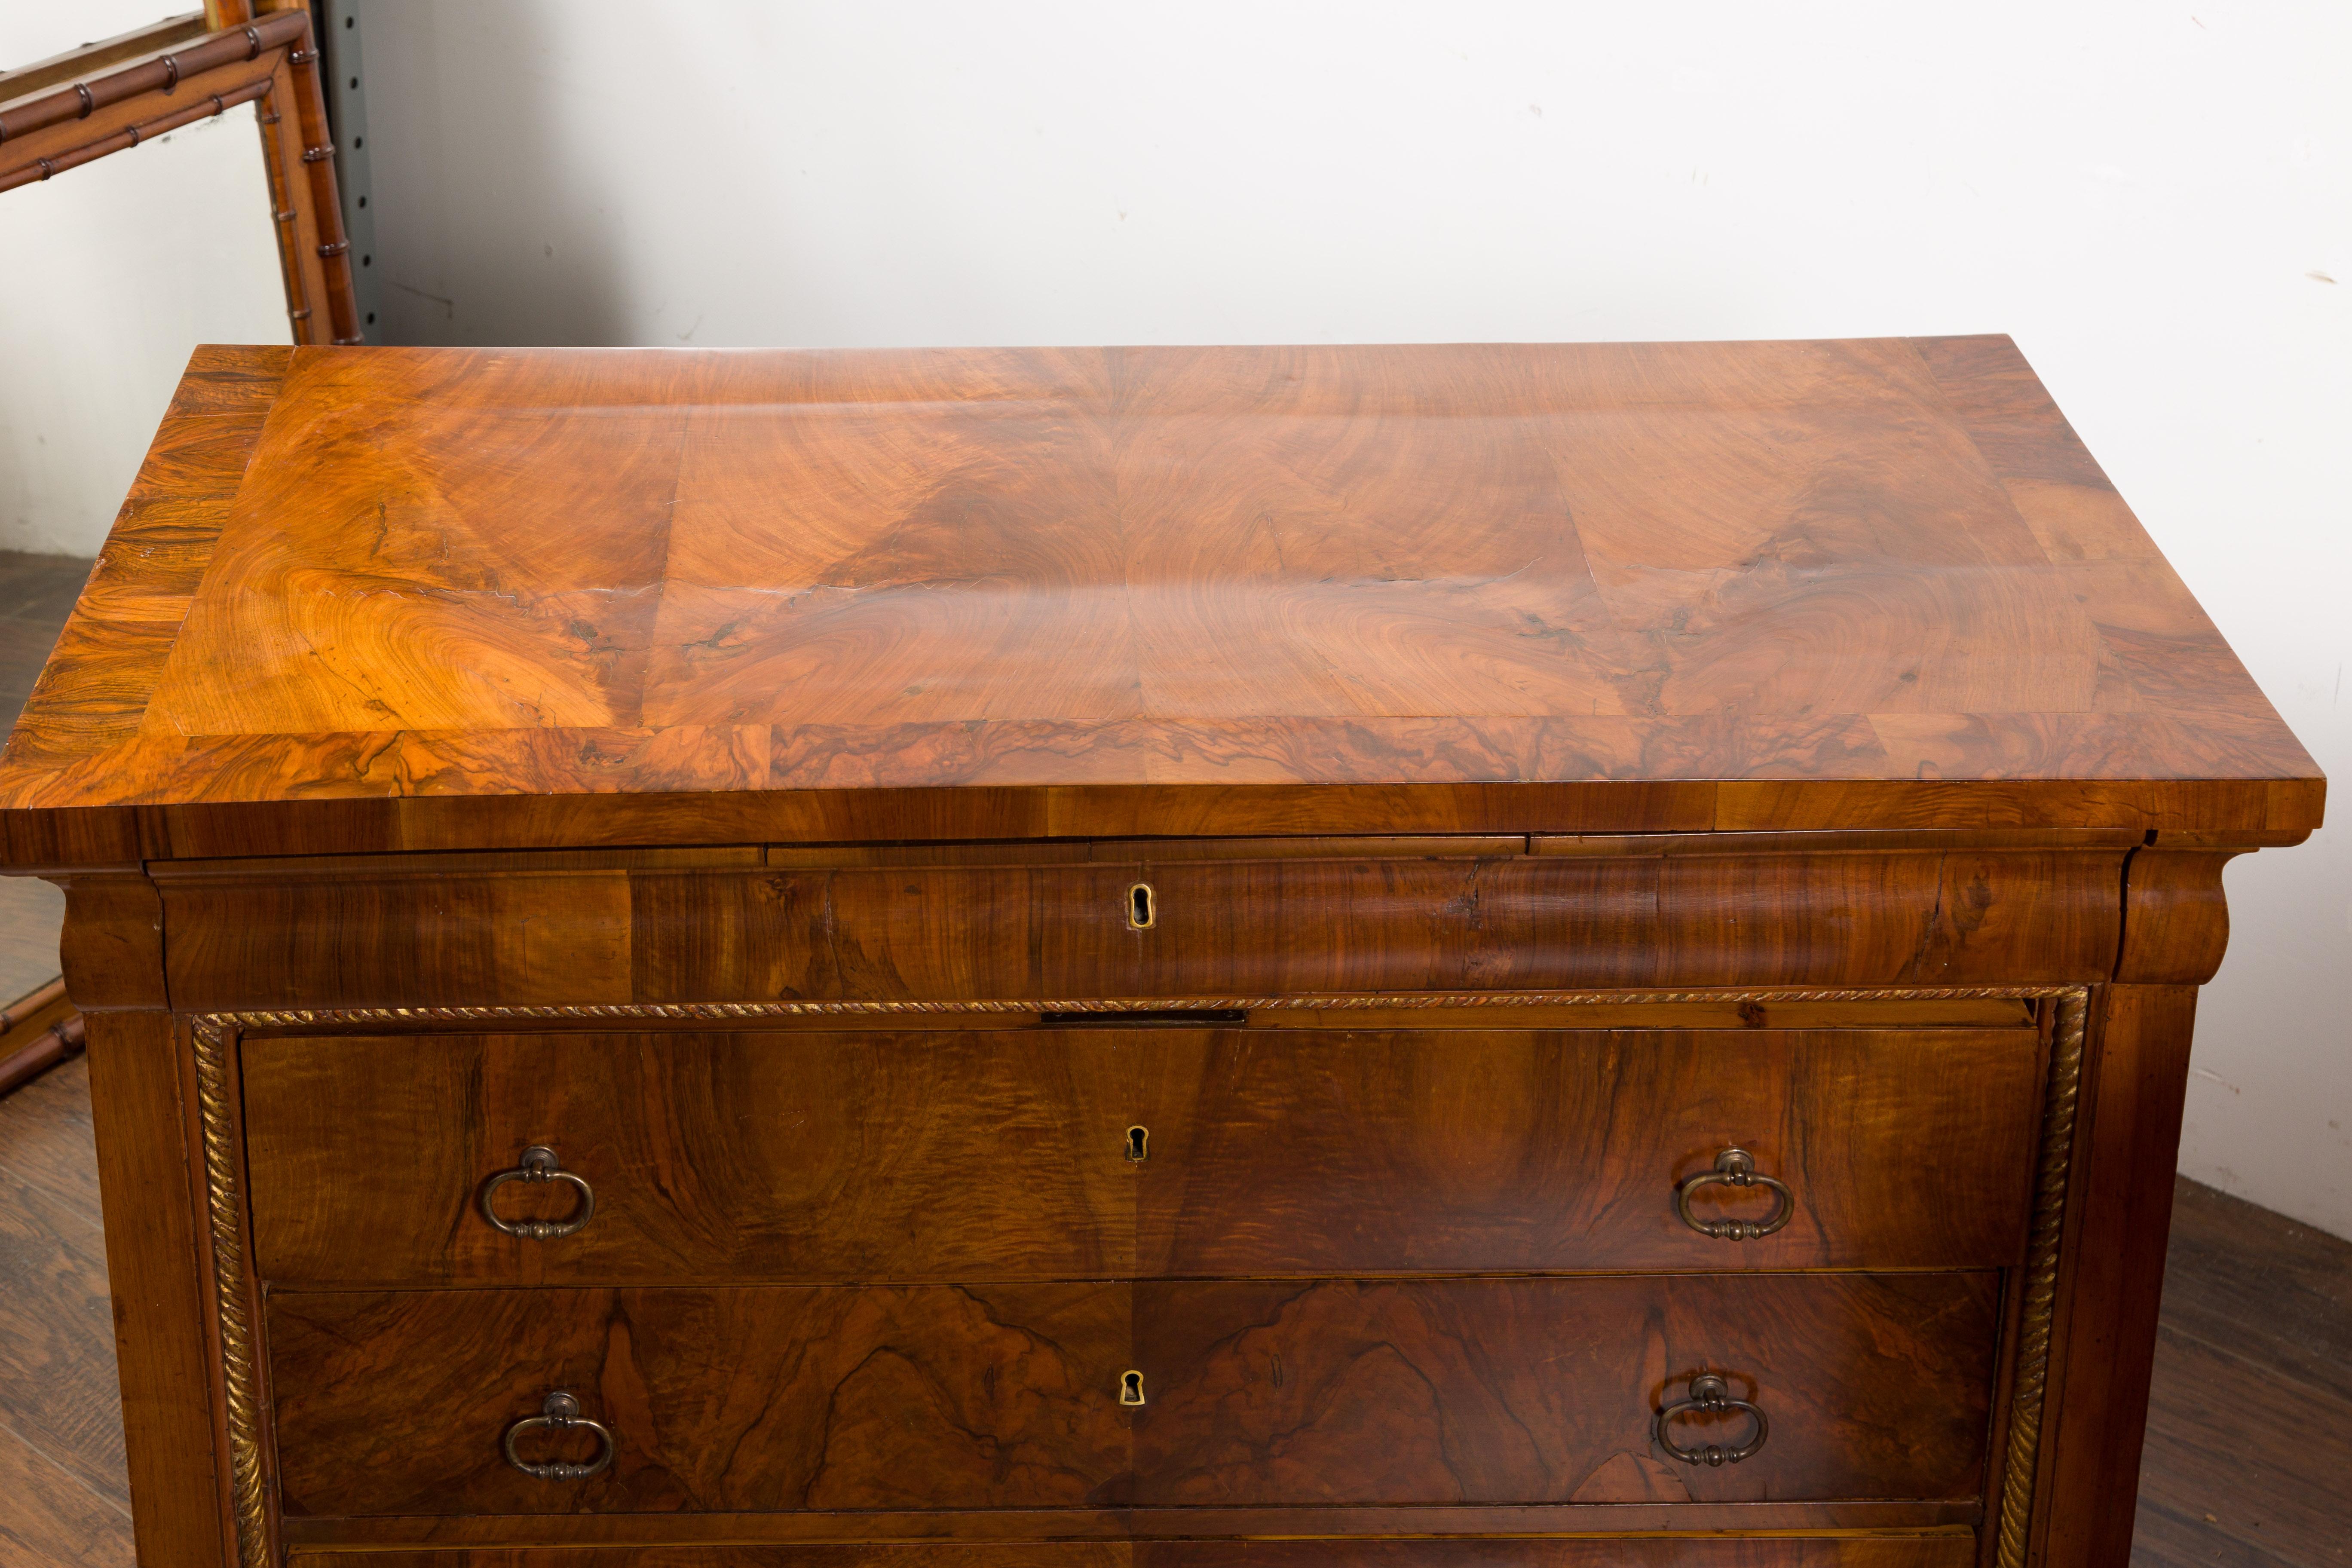 Pair of Italian 18th Century Walnut Four-Drawer Commodes with Bookmatched Veneer For Sale 8